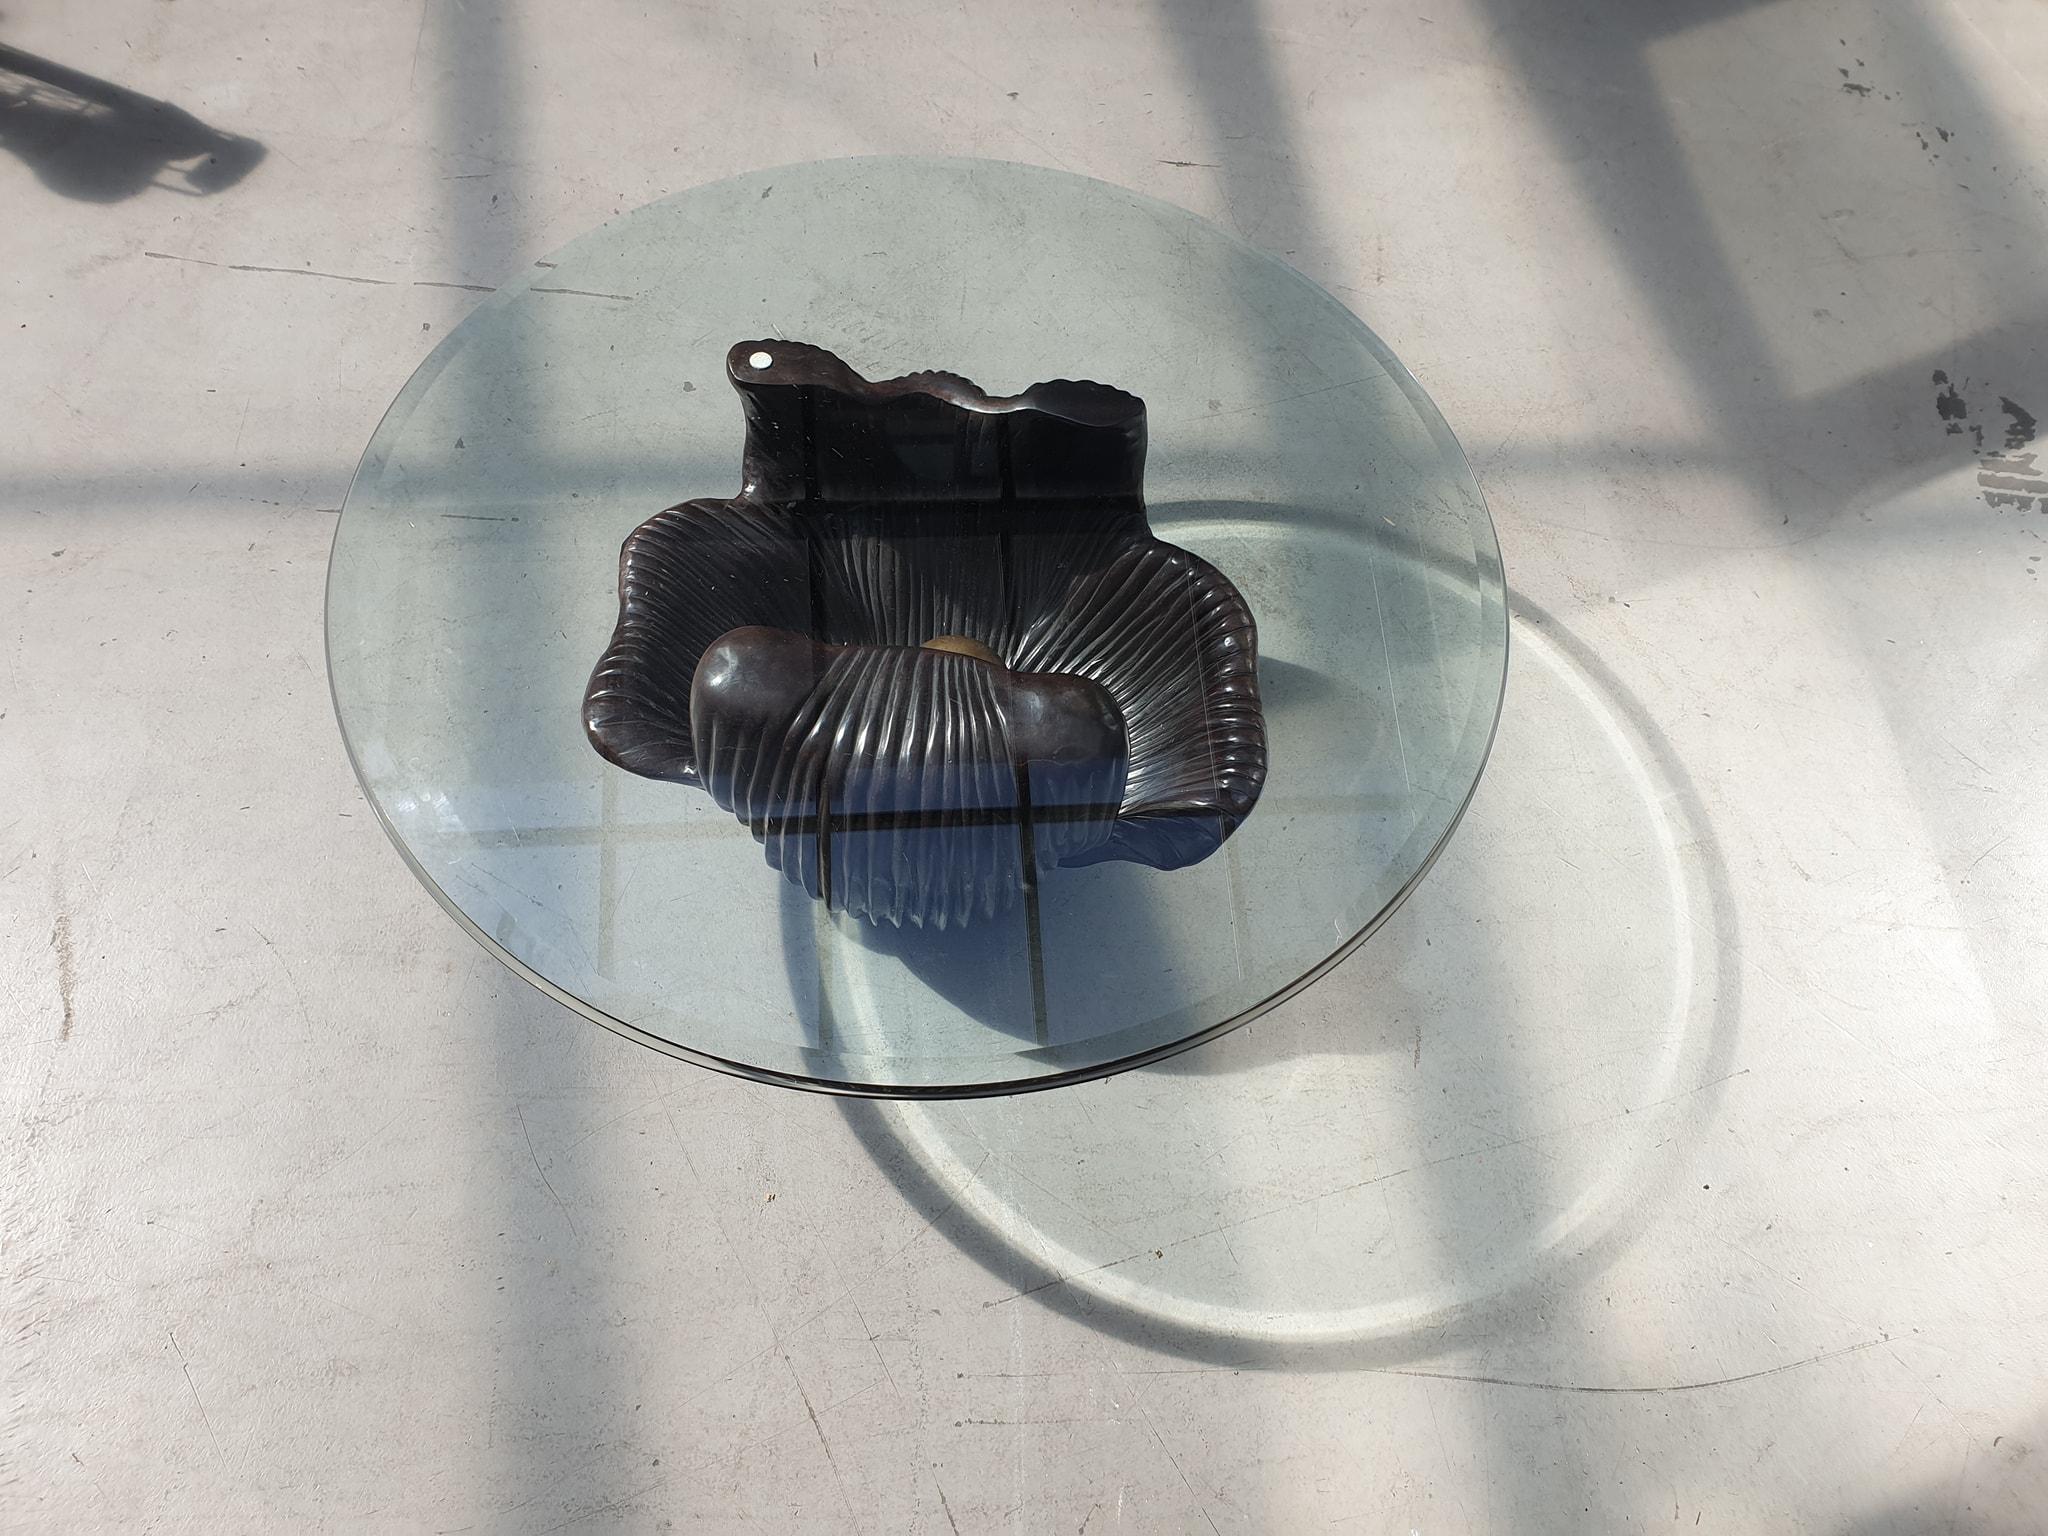 Exceptional coffee table with a bronze base in the shape of an oyster with a round glass top in the style of Paul Evans.
The bronze base weighs 55 kg.

Dimensions of the bronze base:
Depth 54 cm.
Width 70 cm.
Height 40 cm.


The glass top